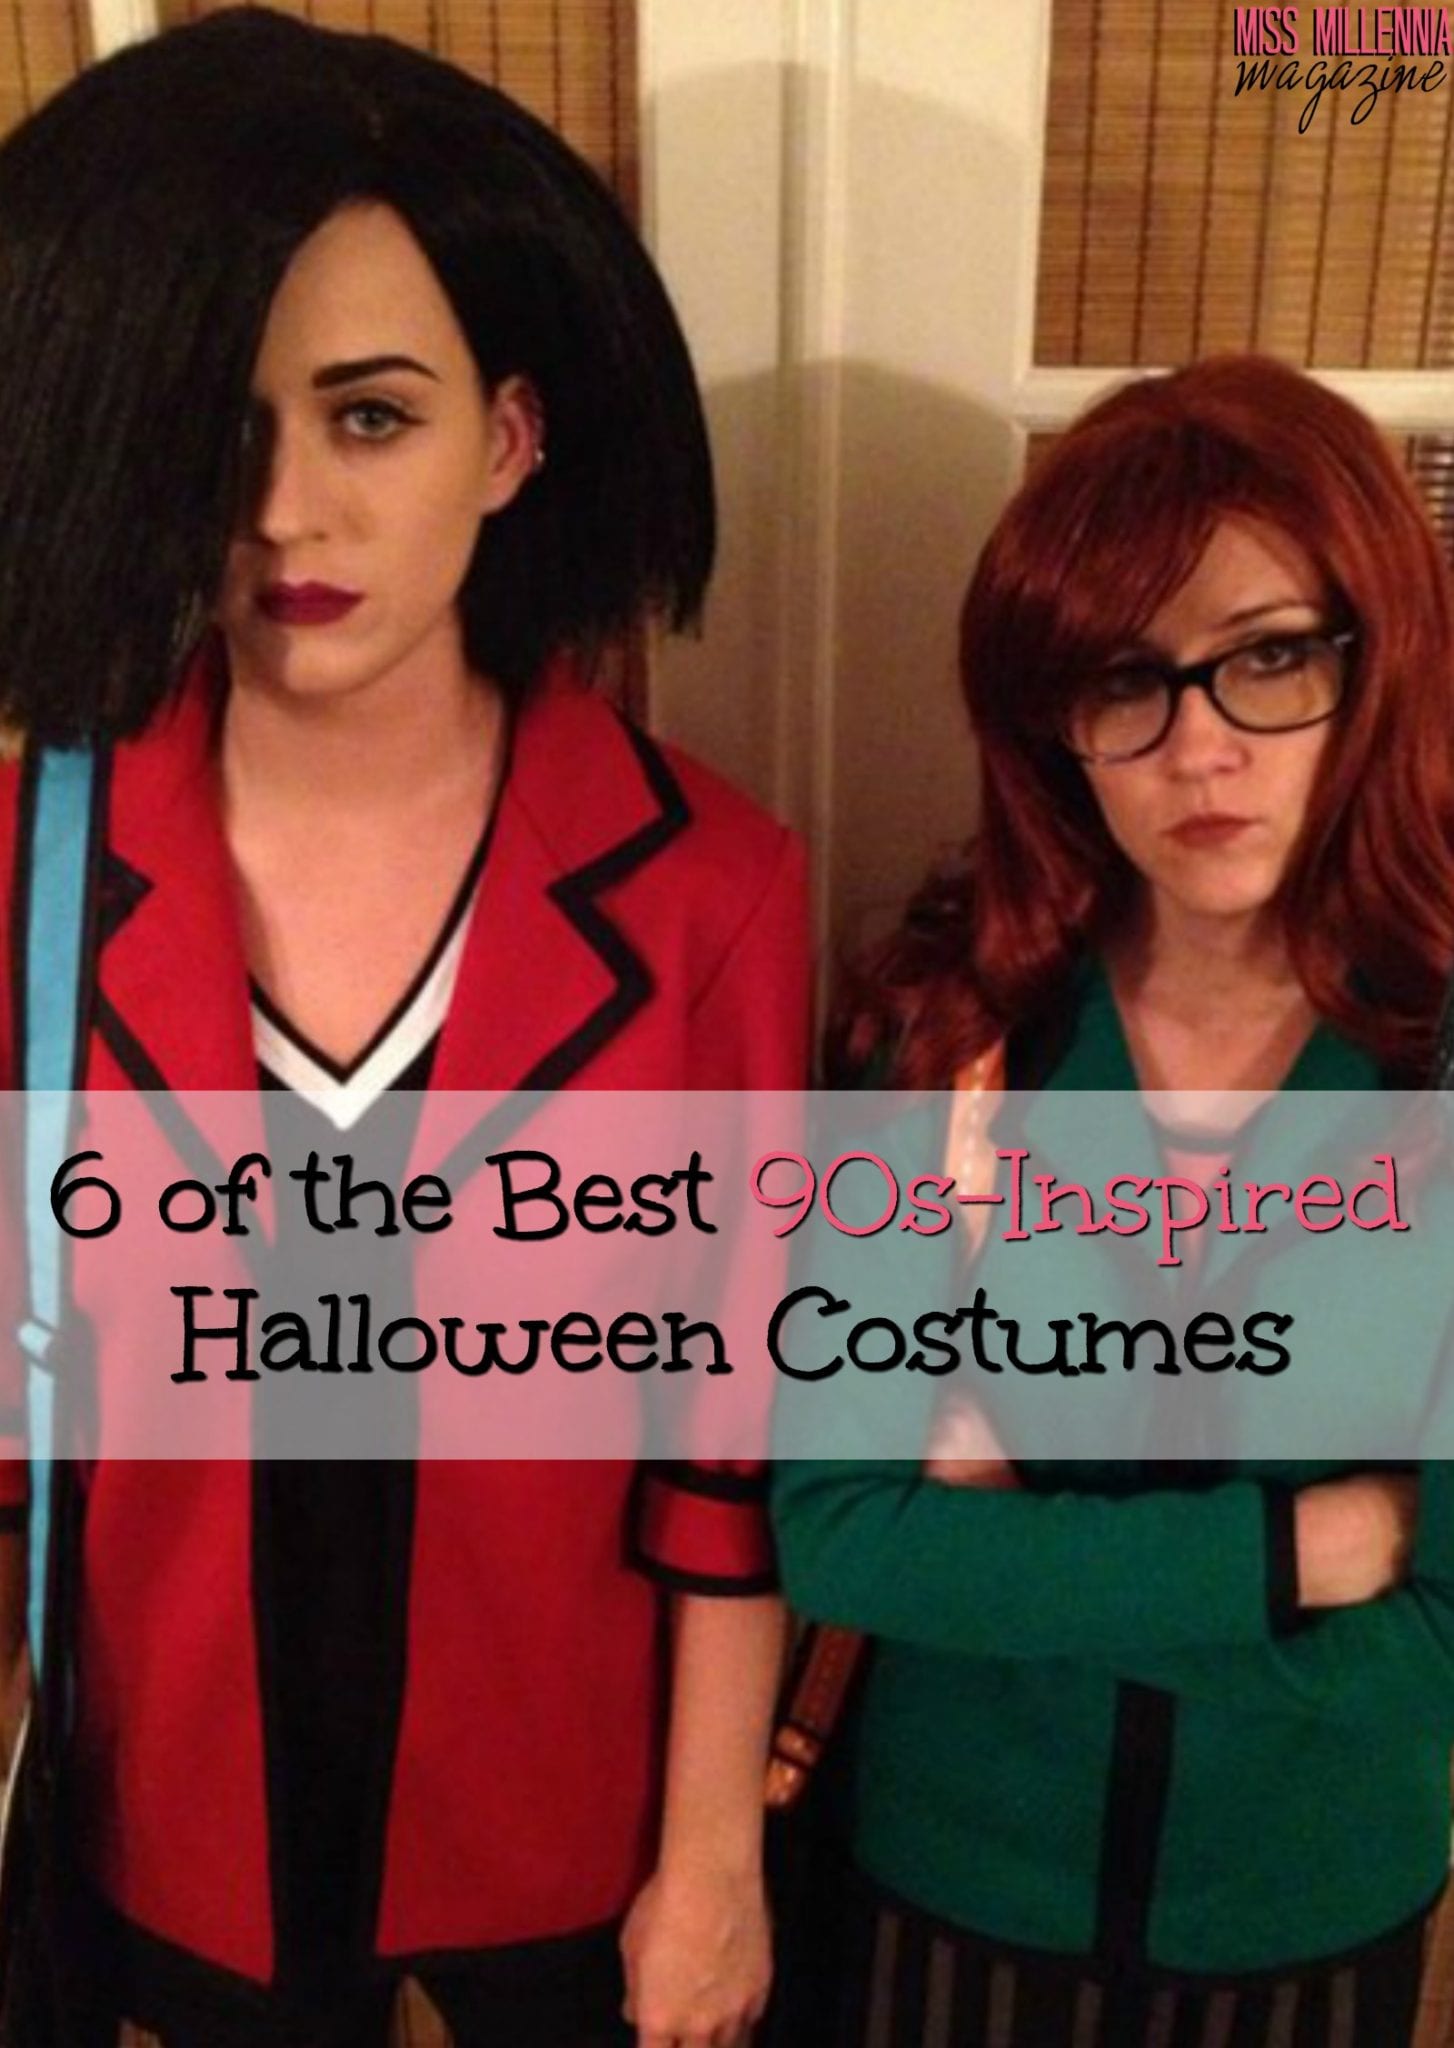 6 of the Best 90s-Inspired Halloween Costumes